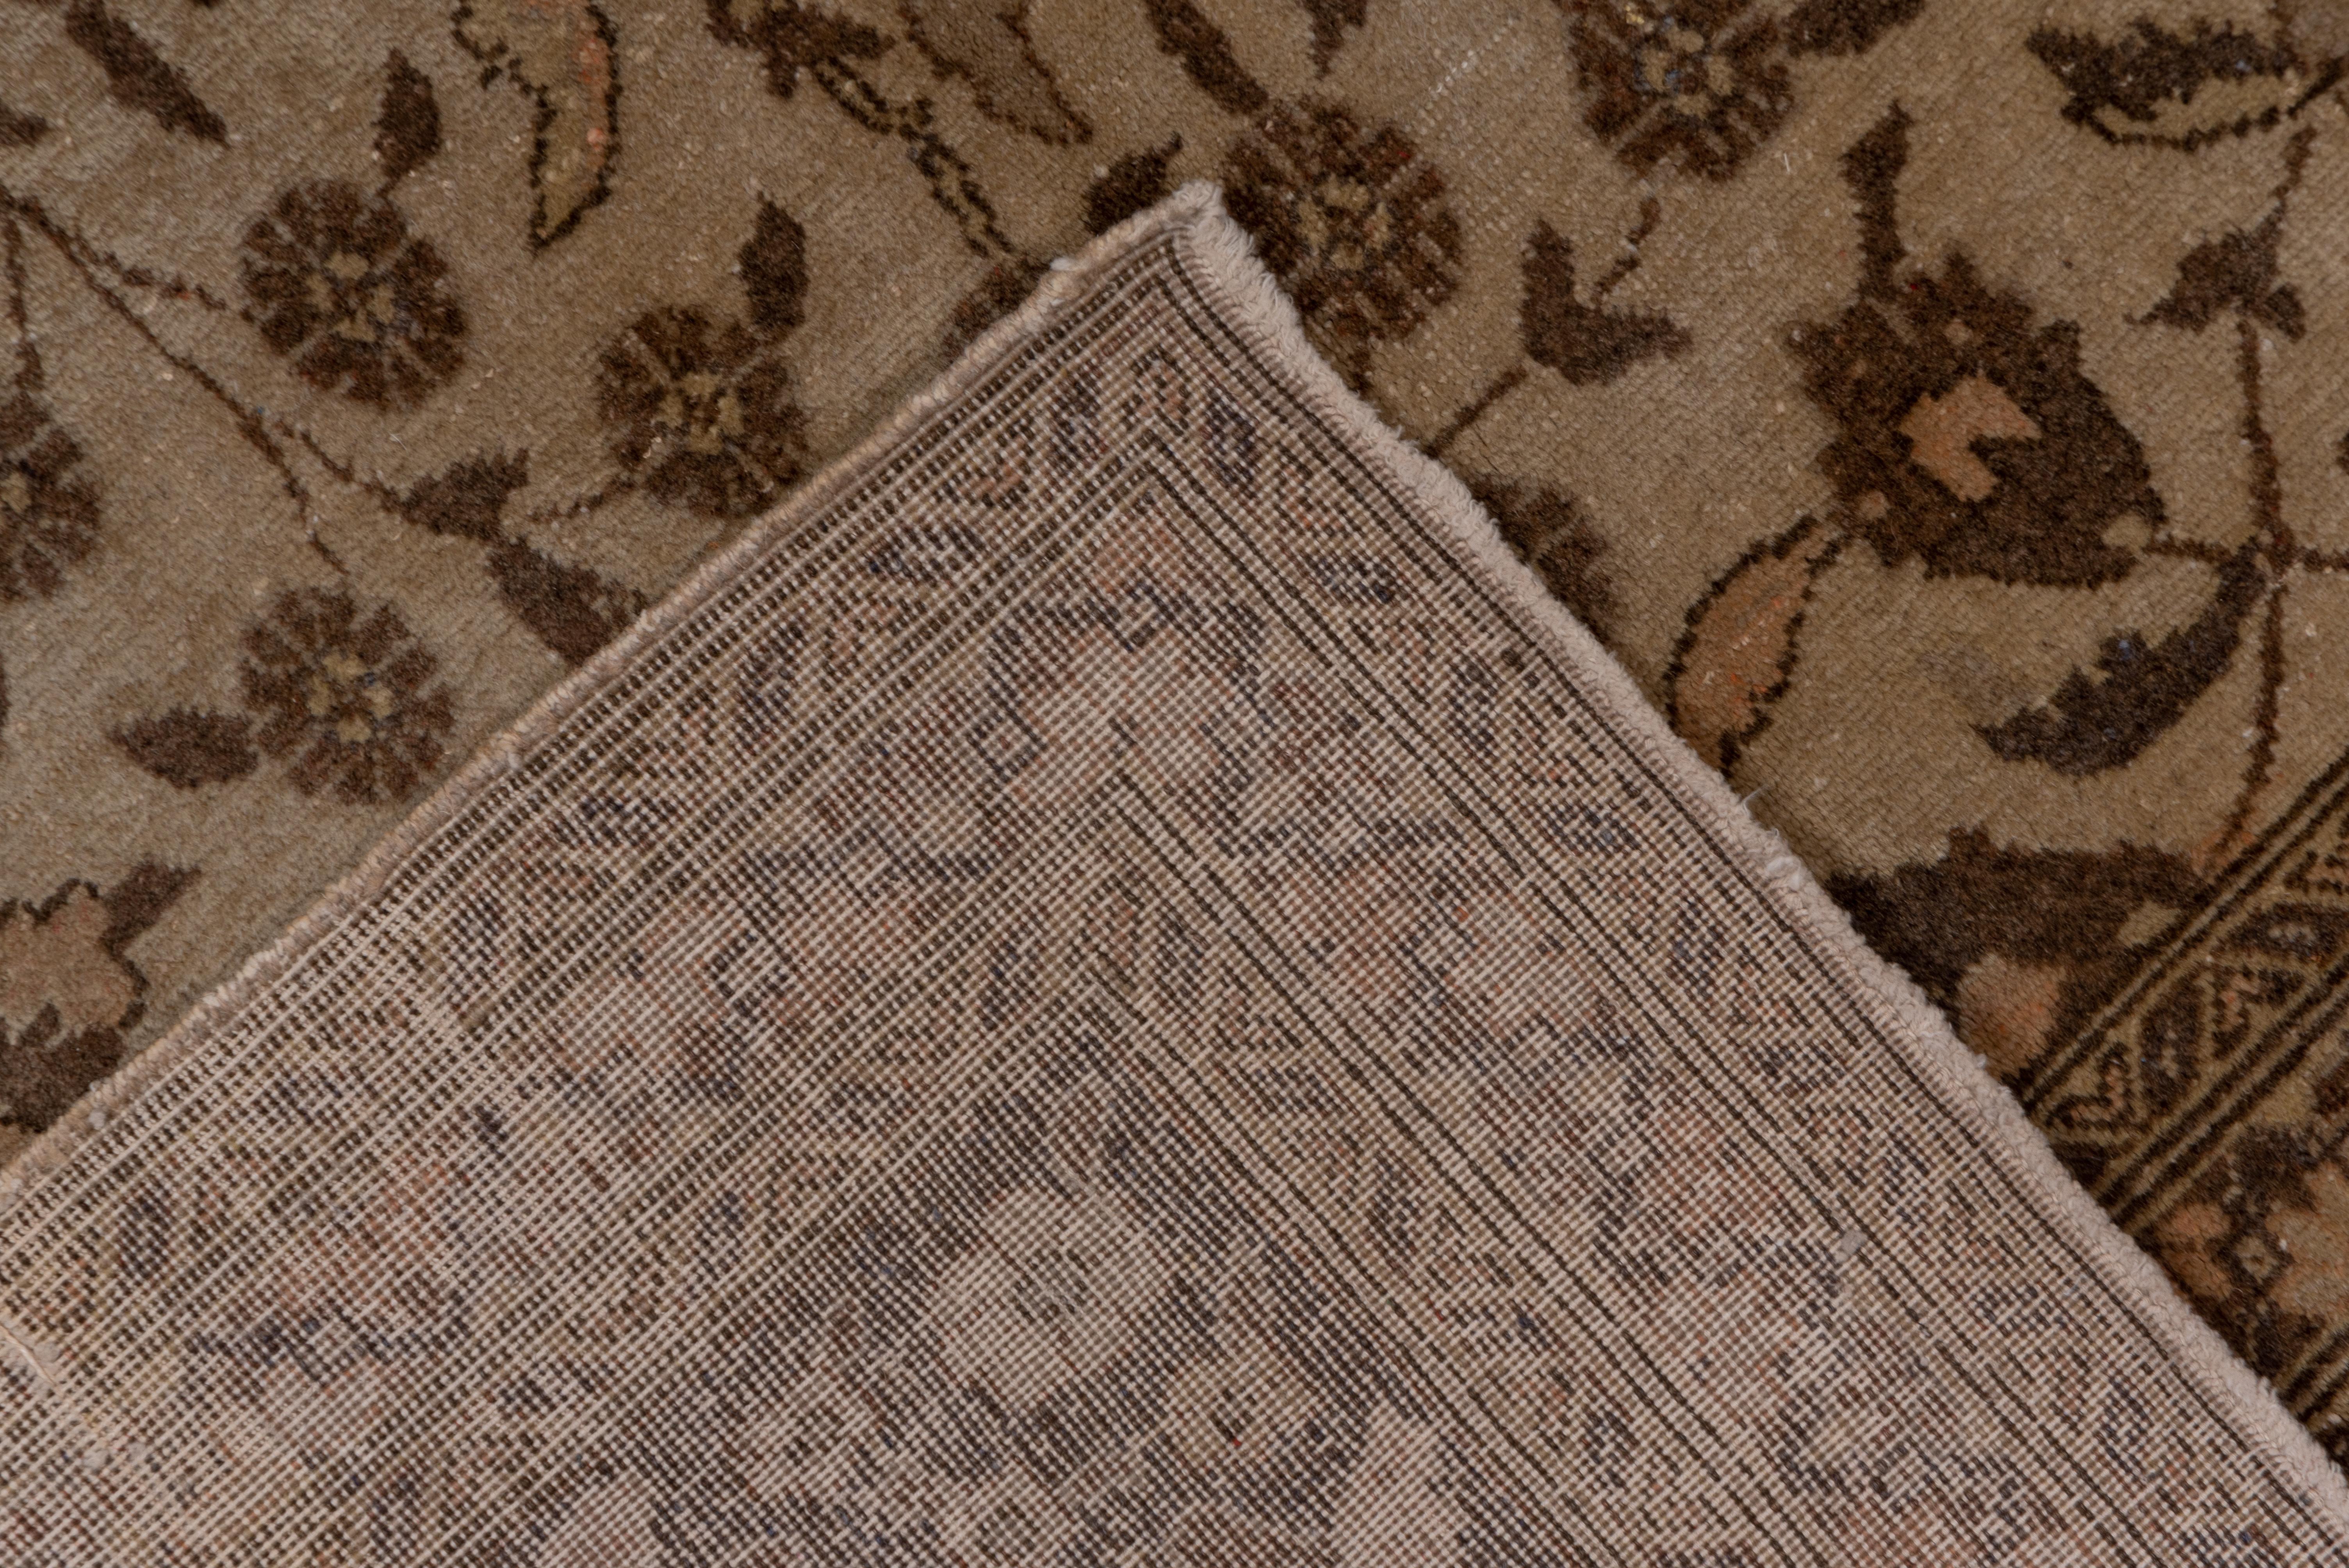 Eastern Turkish Sivas carpets are very much in the urban Tabriz style, as evidenced here by the ivory field with a small leaf, palmette and rosette design organized around an implicit central axis, with a brown escutcheon palmette and hyacinth spray